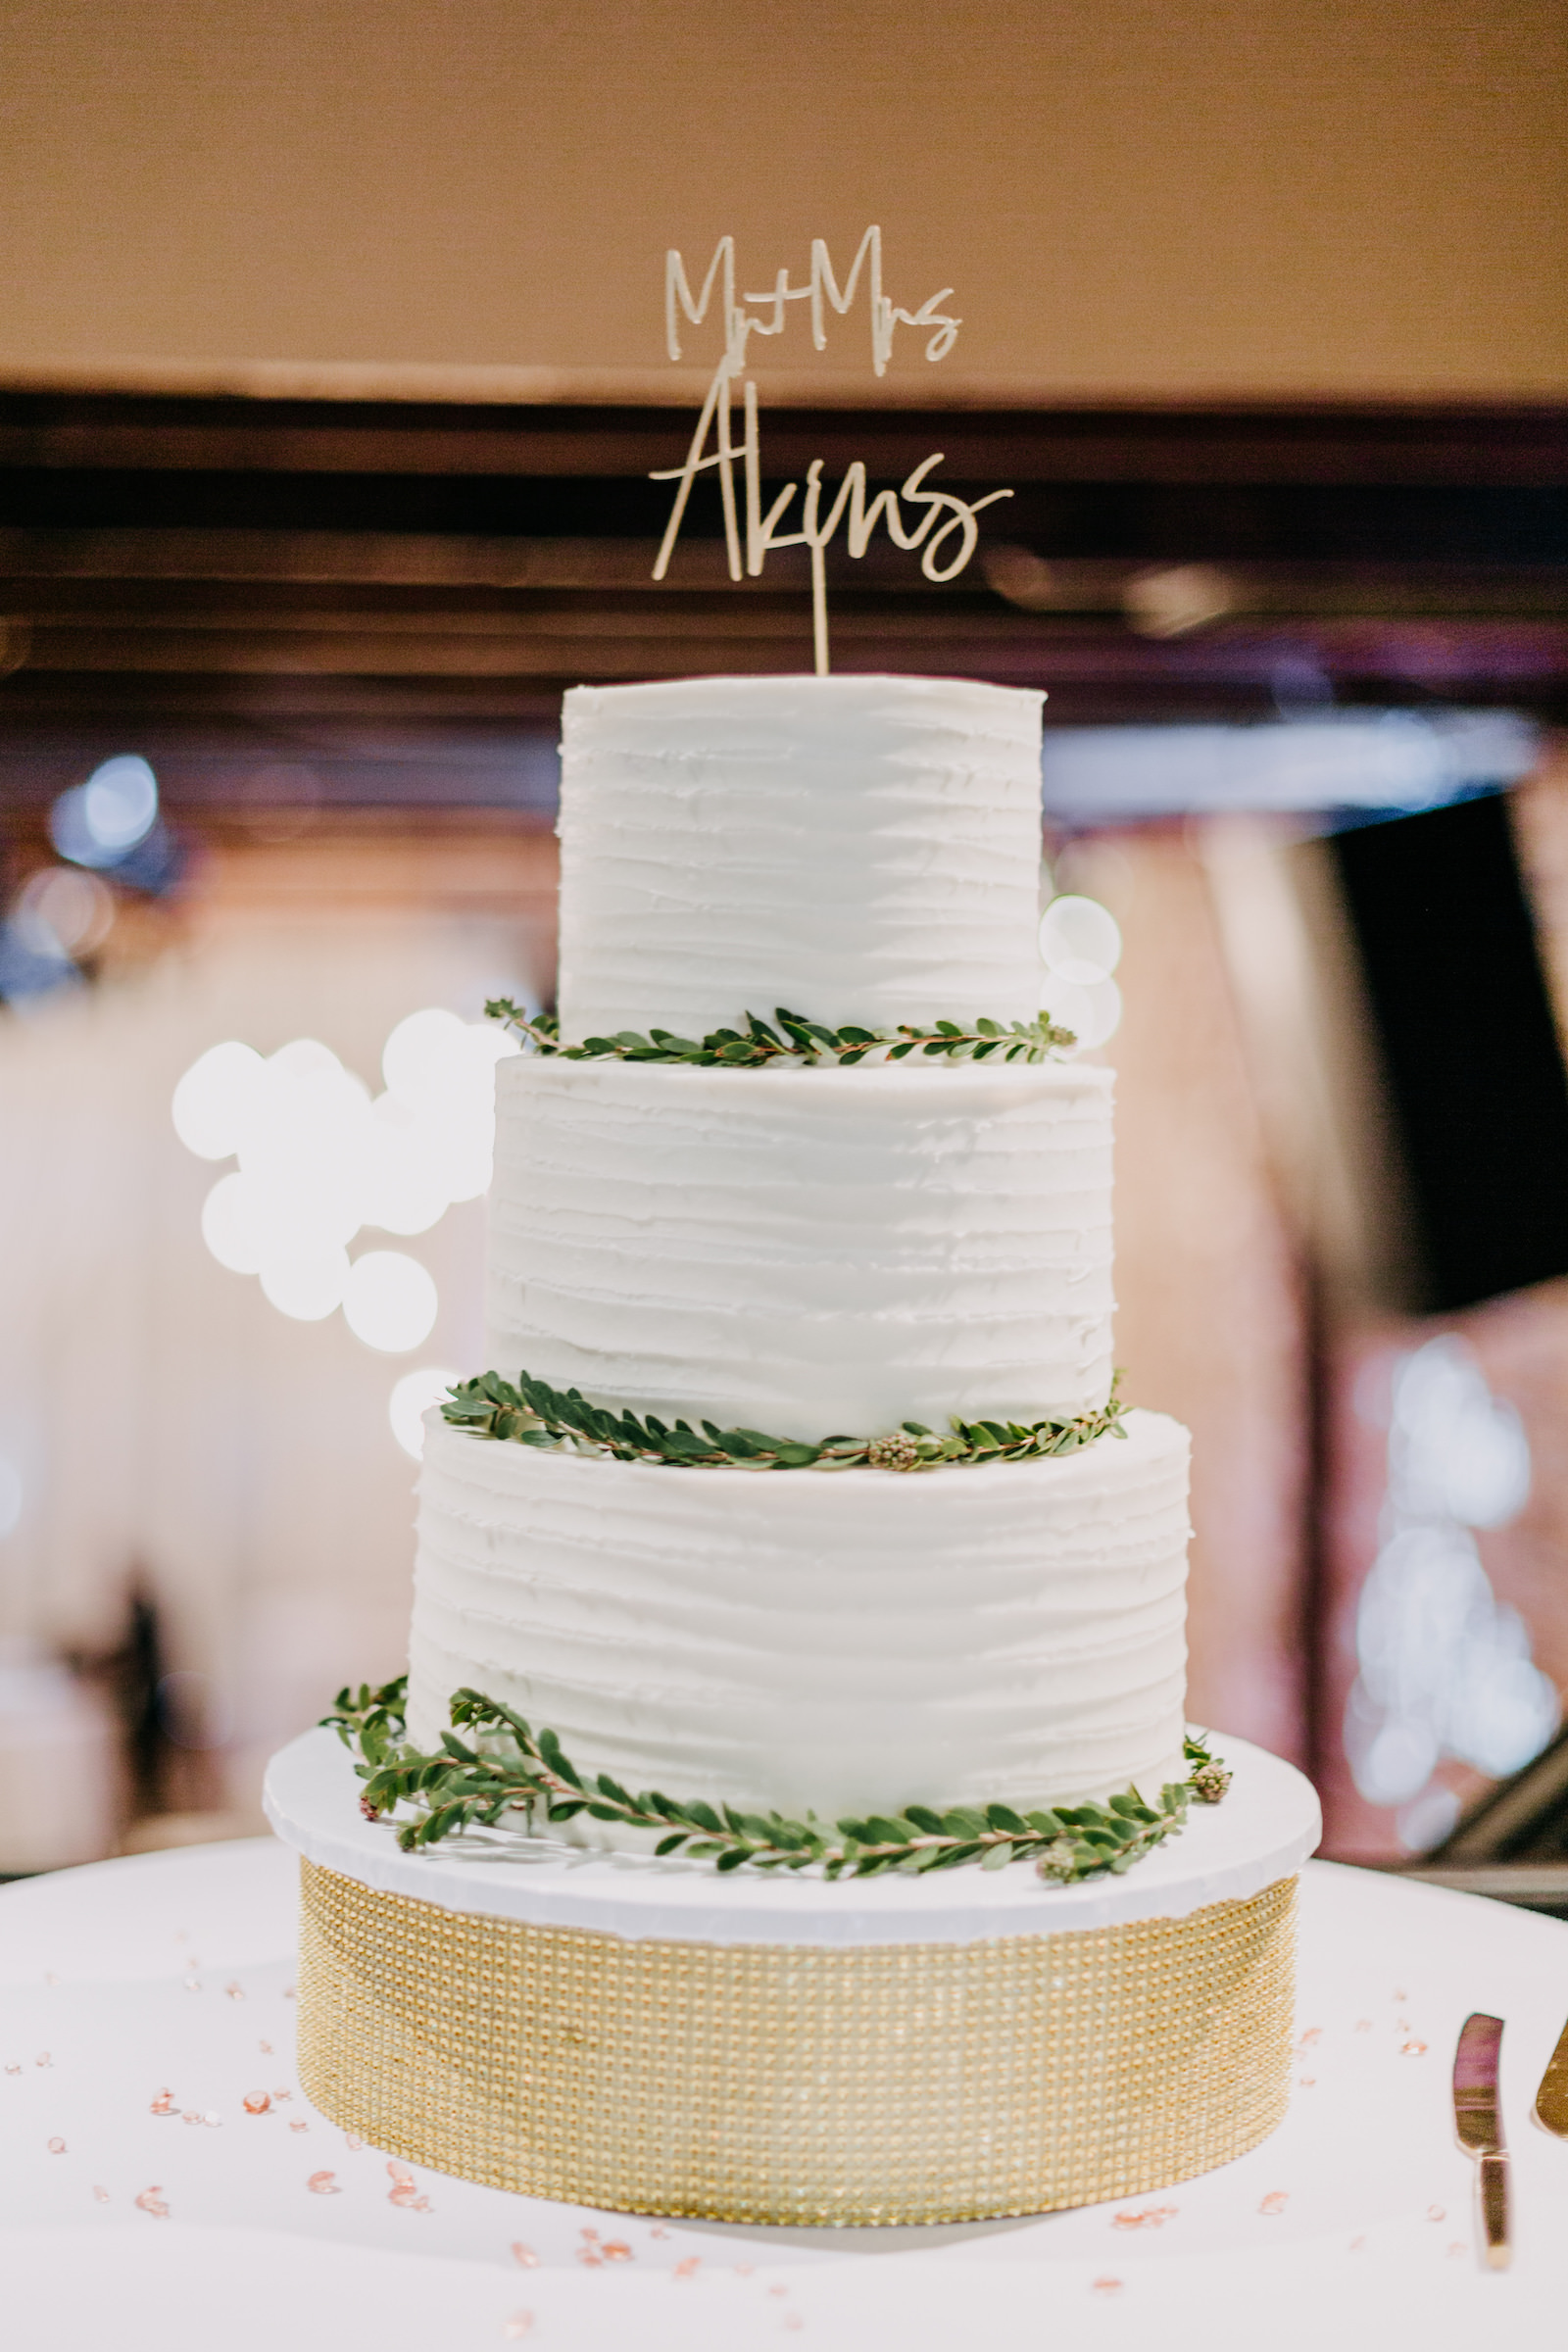 Four Tier White Textured Wedding Cake With Gold Details, Greenery, and a Gold Cake Topper